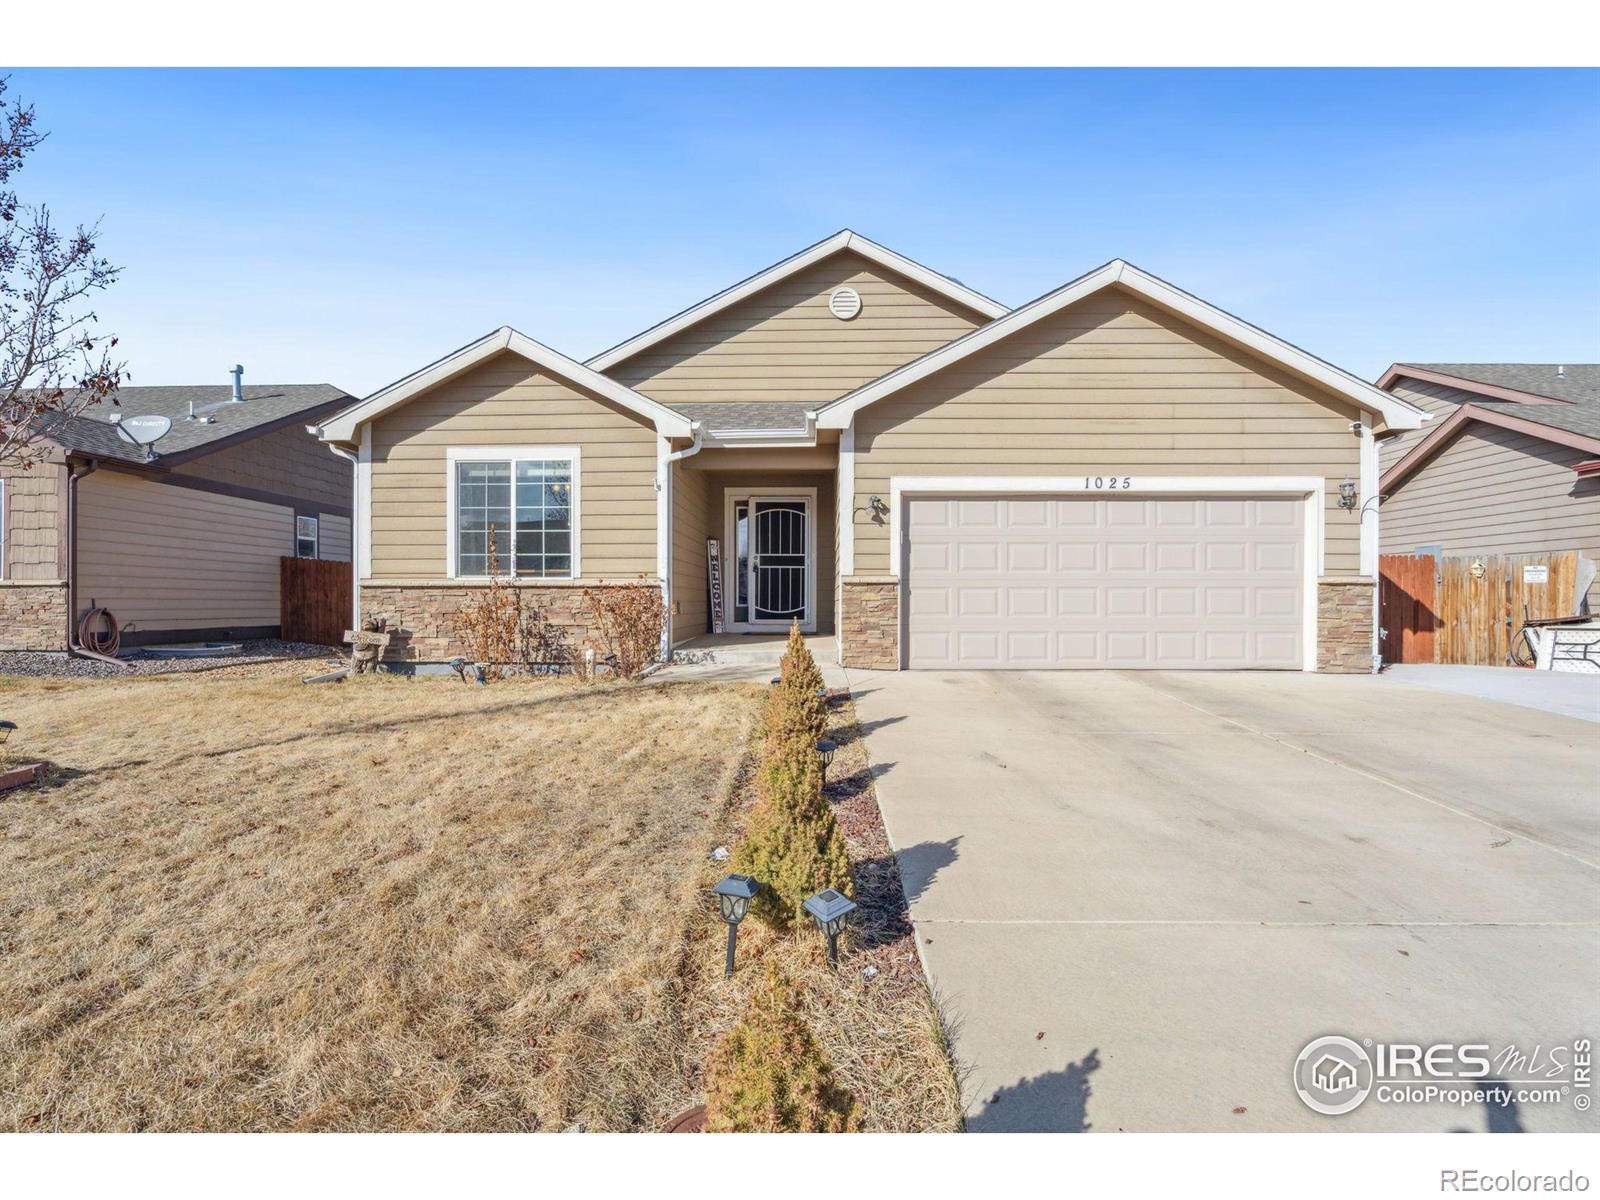 1025 E 25th Street, greeley MLS: 4567891003791 Beds: 3 Baths: 2 Price: $410,000